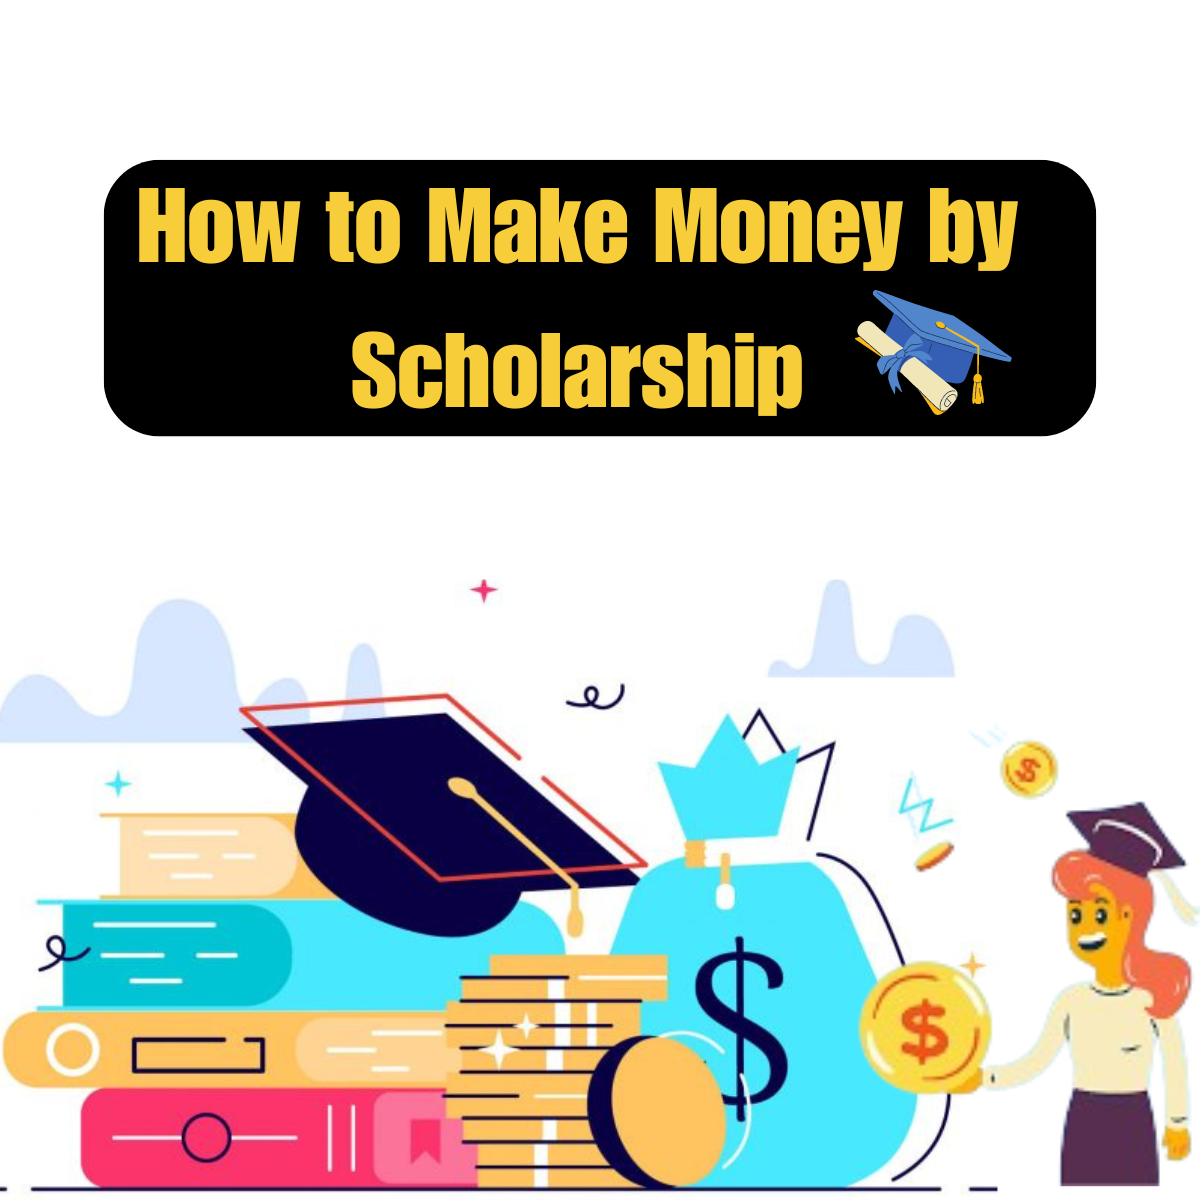 How to Make Money by Scholarship